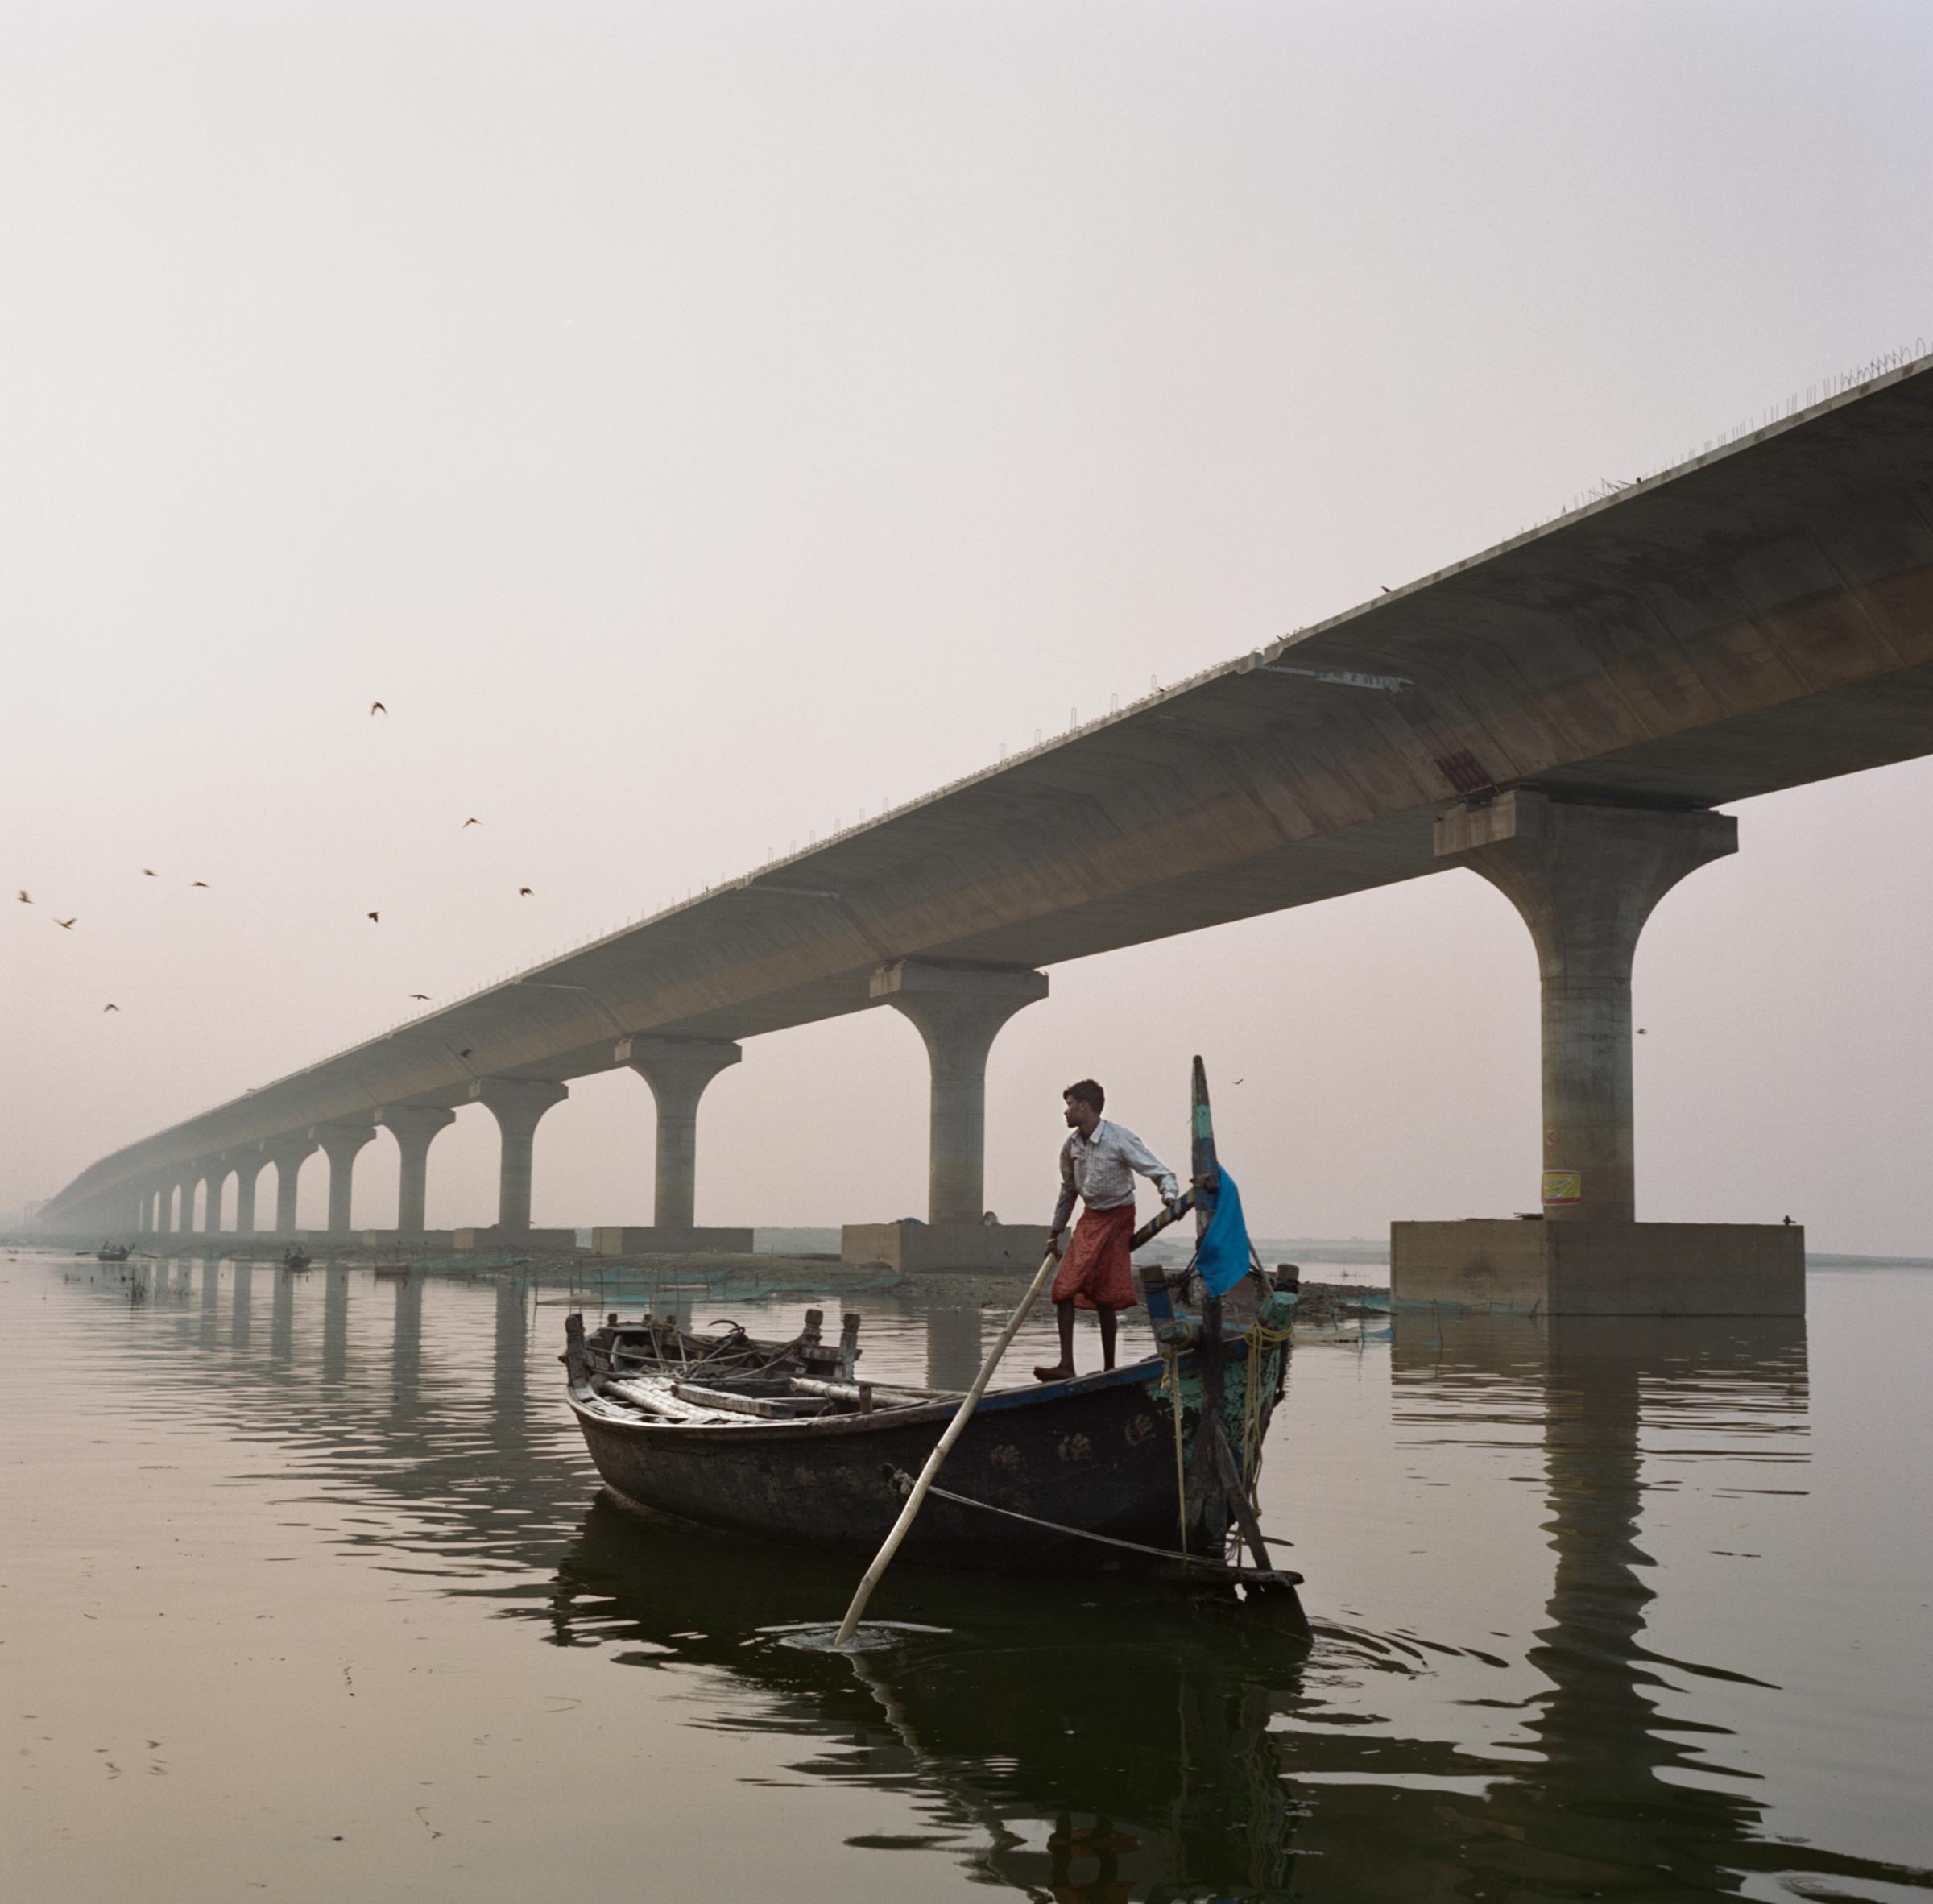 Plastic's Threat to Life Along the Ganges River - In Patna, a boatman surveys the Ganges near a recently...